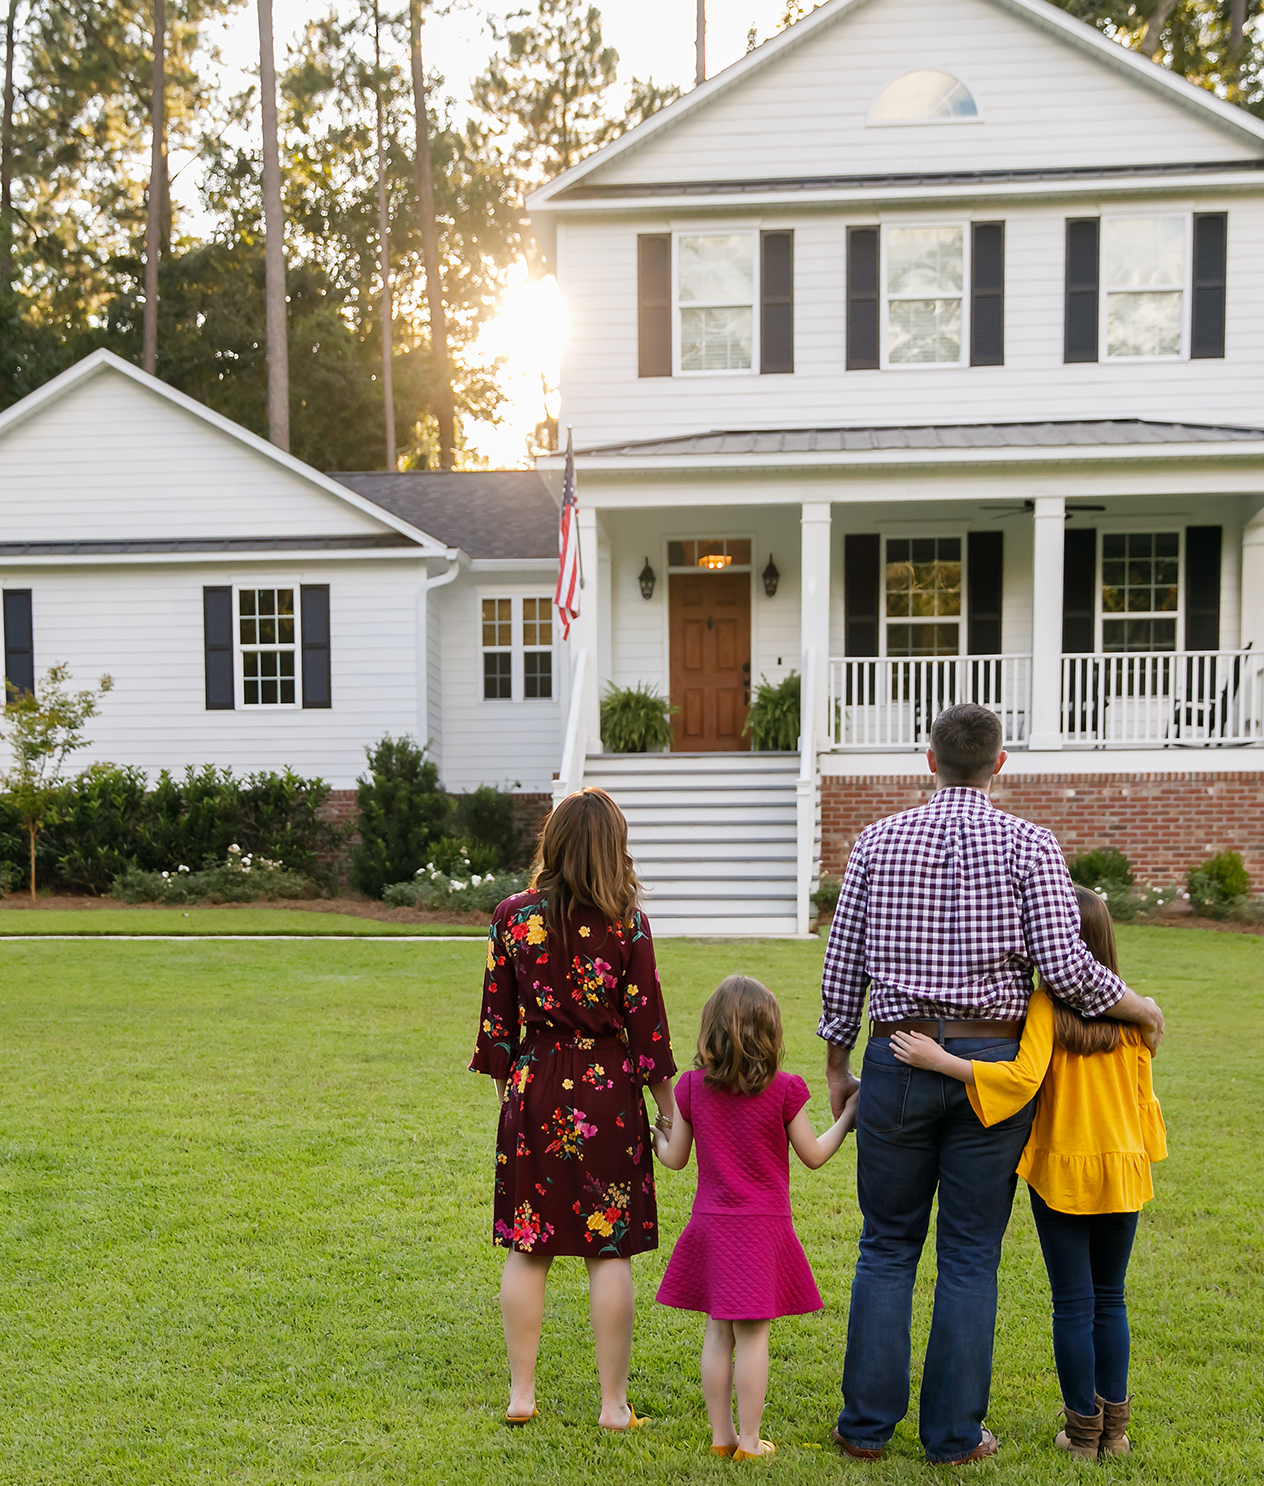 The Most Trusted Jefferson Home Warranty